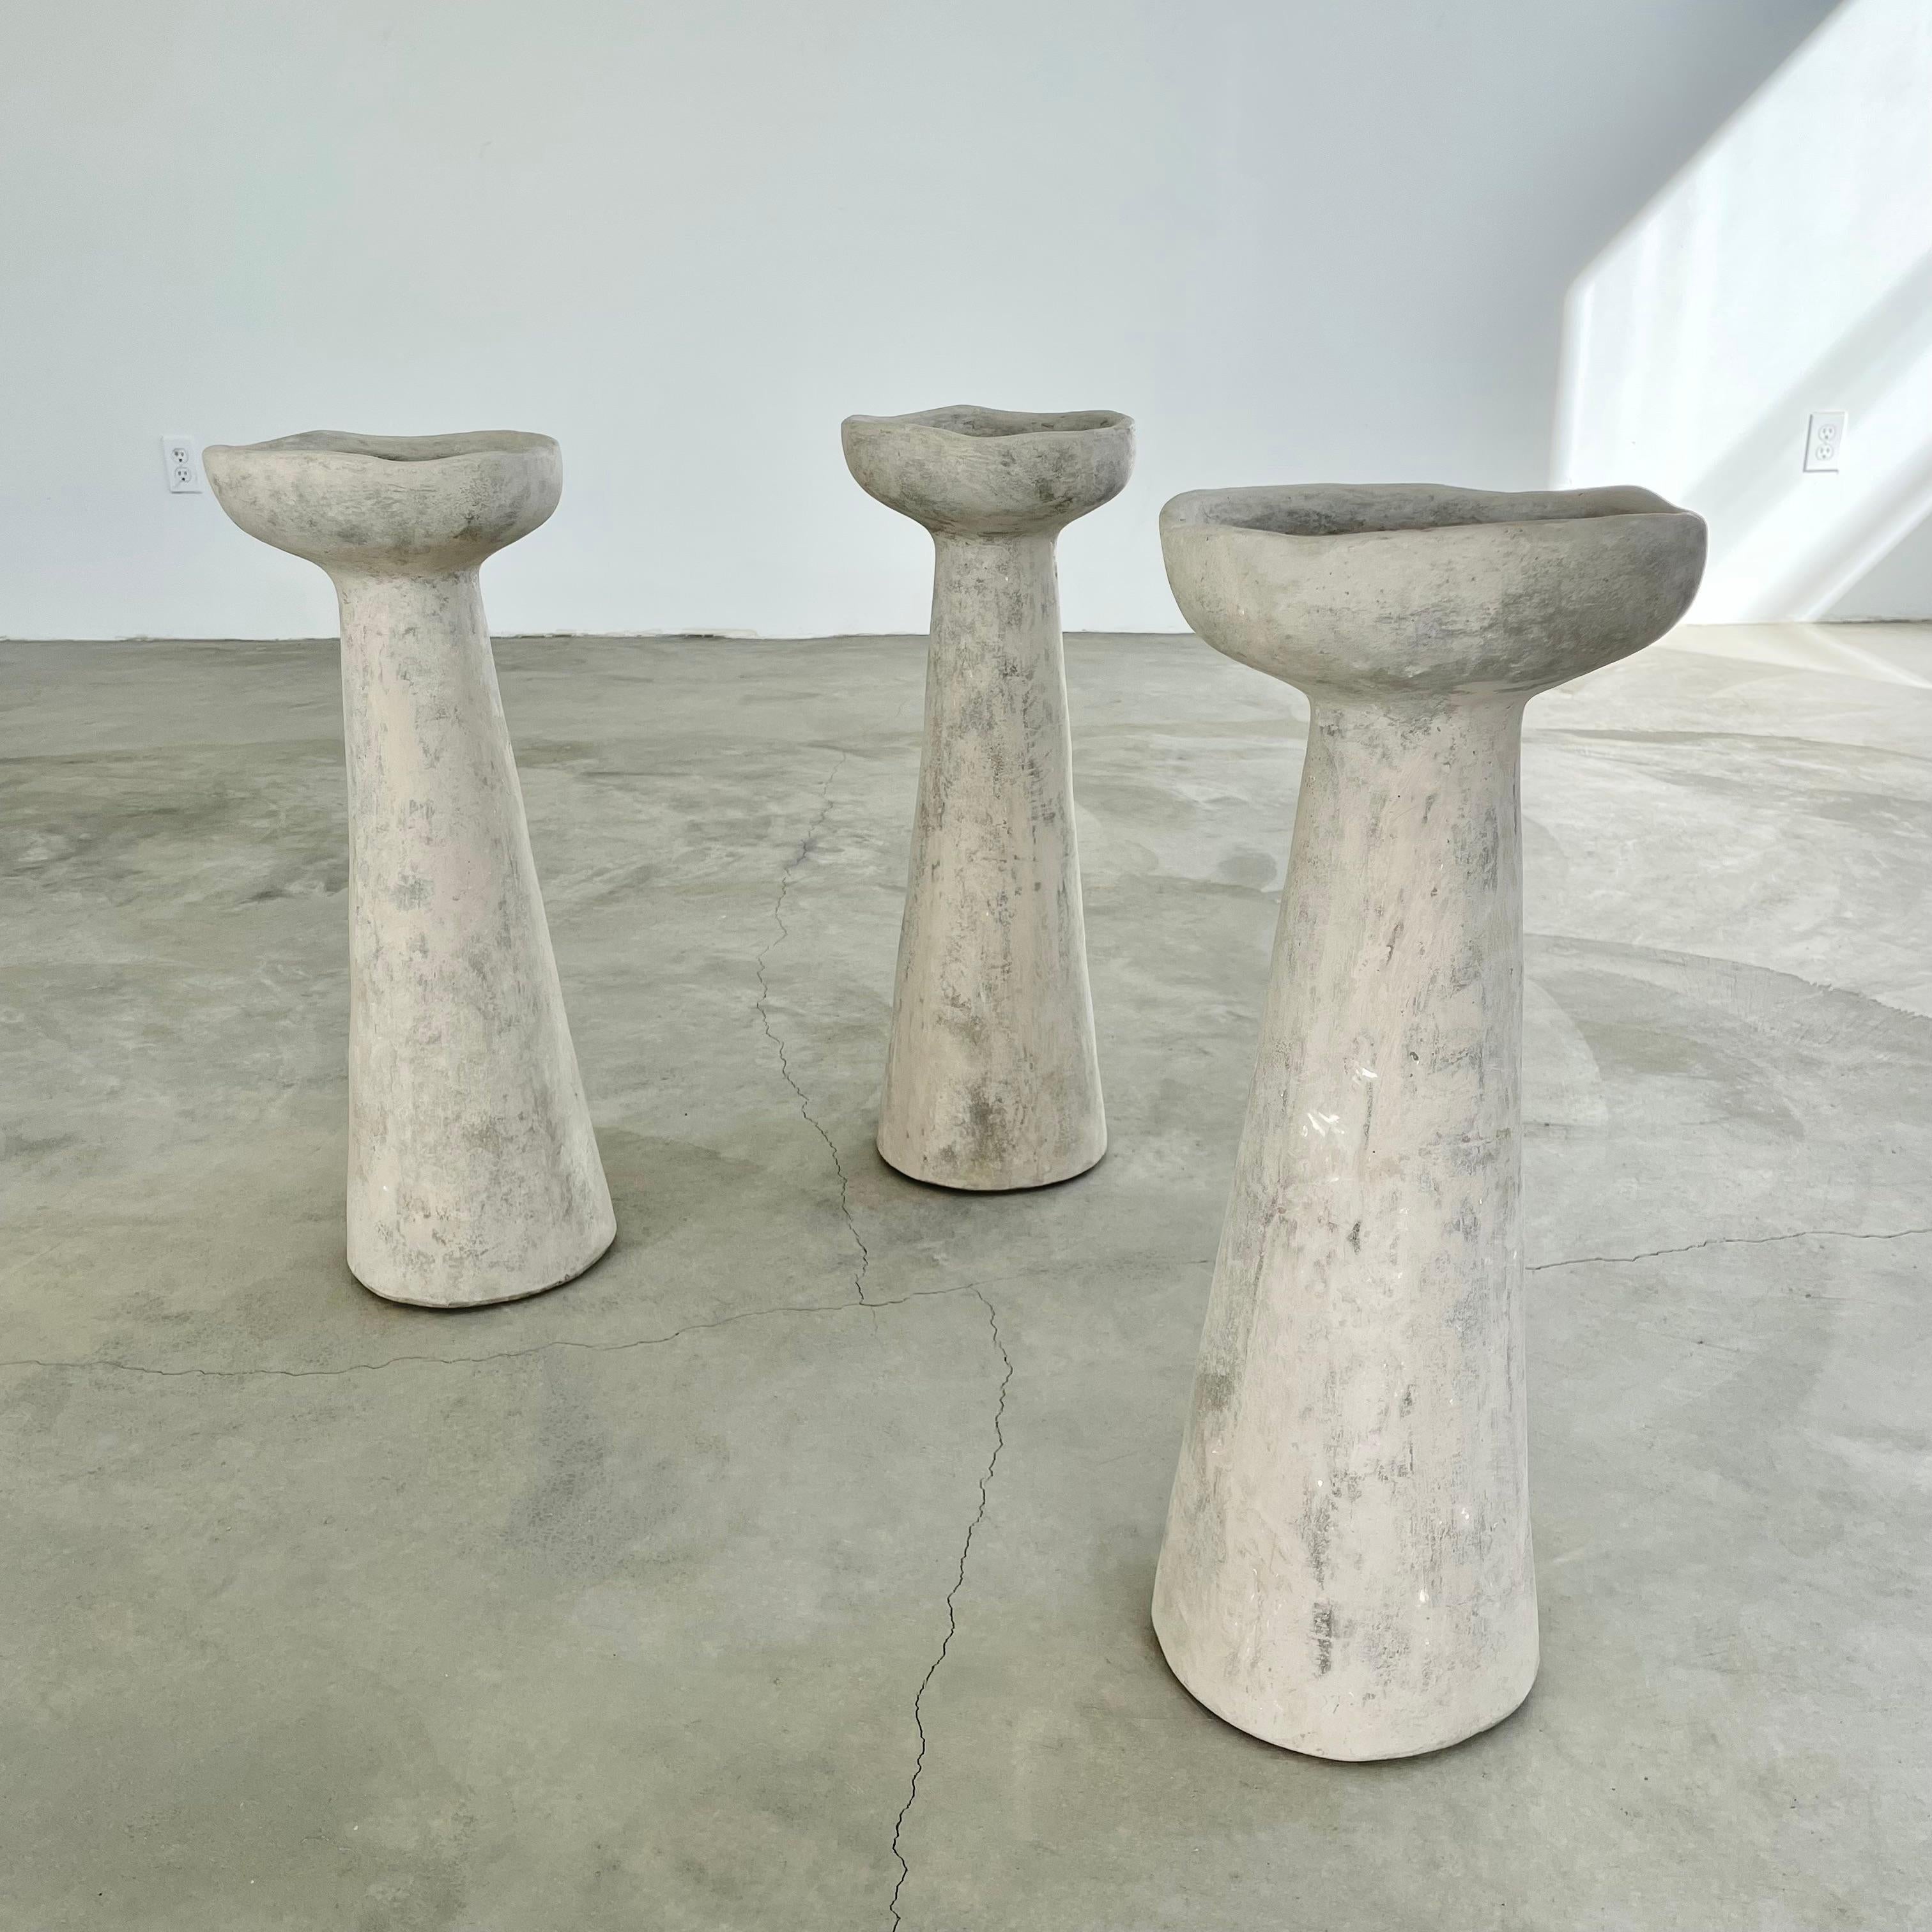 Vintage plaster/concrete bird baths in the style of Willy Guhl. Great shape and form. Good vintage condition. Three available, priced individually.